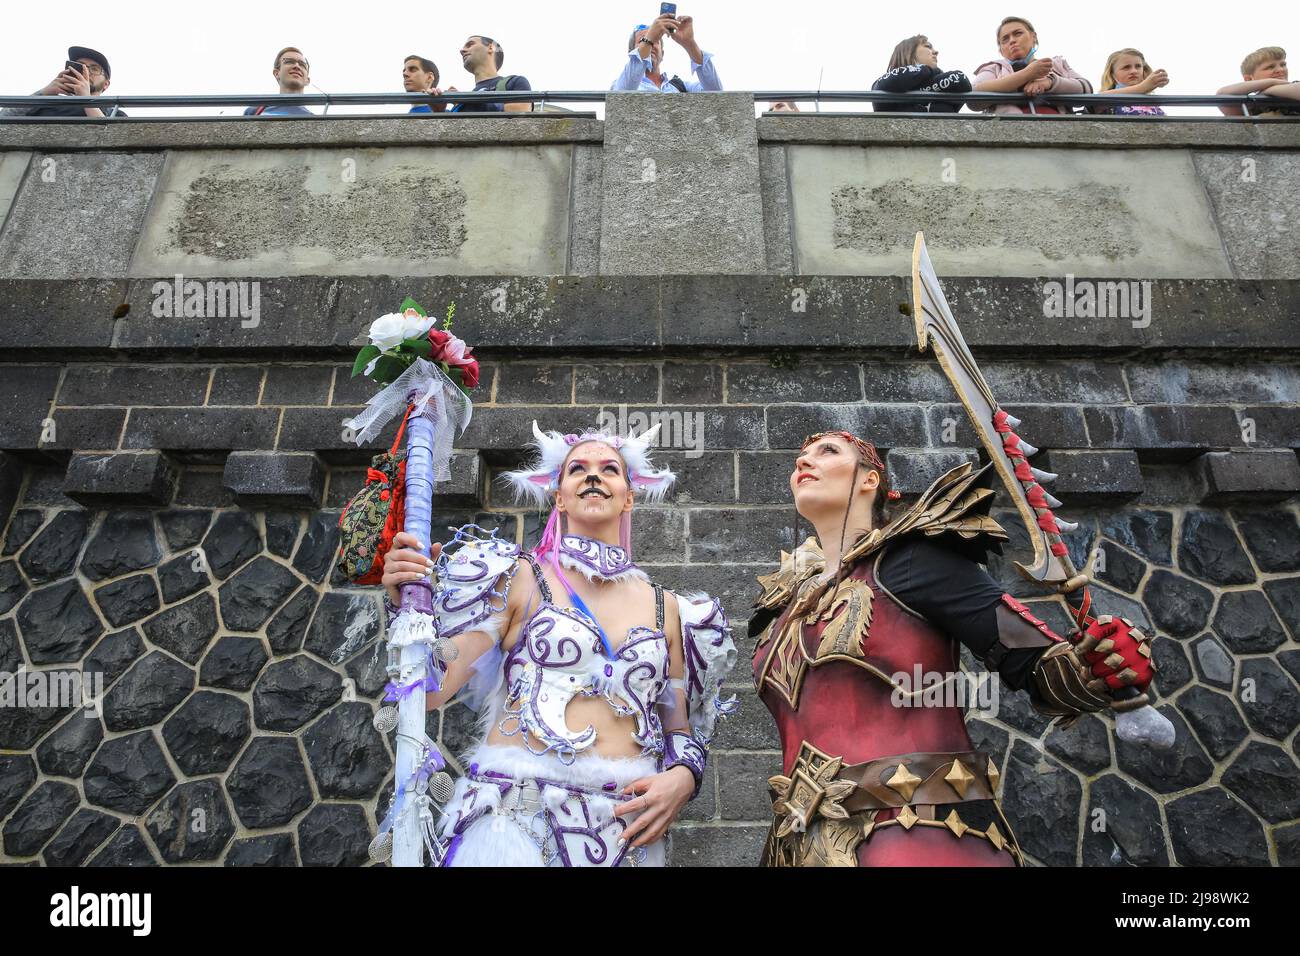 Düsseldorf, NRW, Germany. 21st May, 2022. People watch as cosplayers pose below. Tens of thousands of visitors and cosplayers enjoy the warm sunshine along the river Rhine embankment in their outfits inspired by Japanese anime, video and games. Stage performances, cosplay, stalls and demonstrations of Japanese culture, sports and traditions are featured at Düsseldorf's annual Japan Day, celebrating Japan and the Japanese community in the city. Düsseldorf is home to the largest Japanese community in Germany. Credit: Imageplotter/Alamy Live News Stock Photo